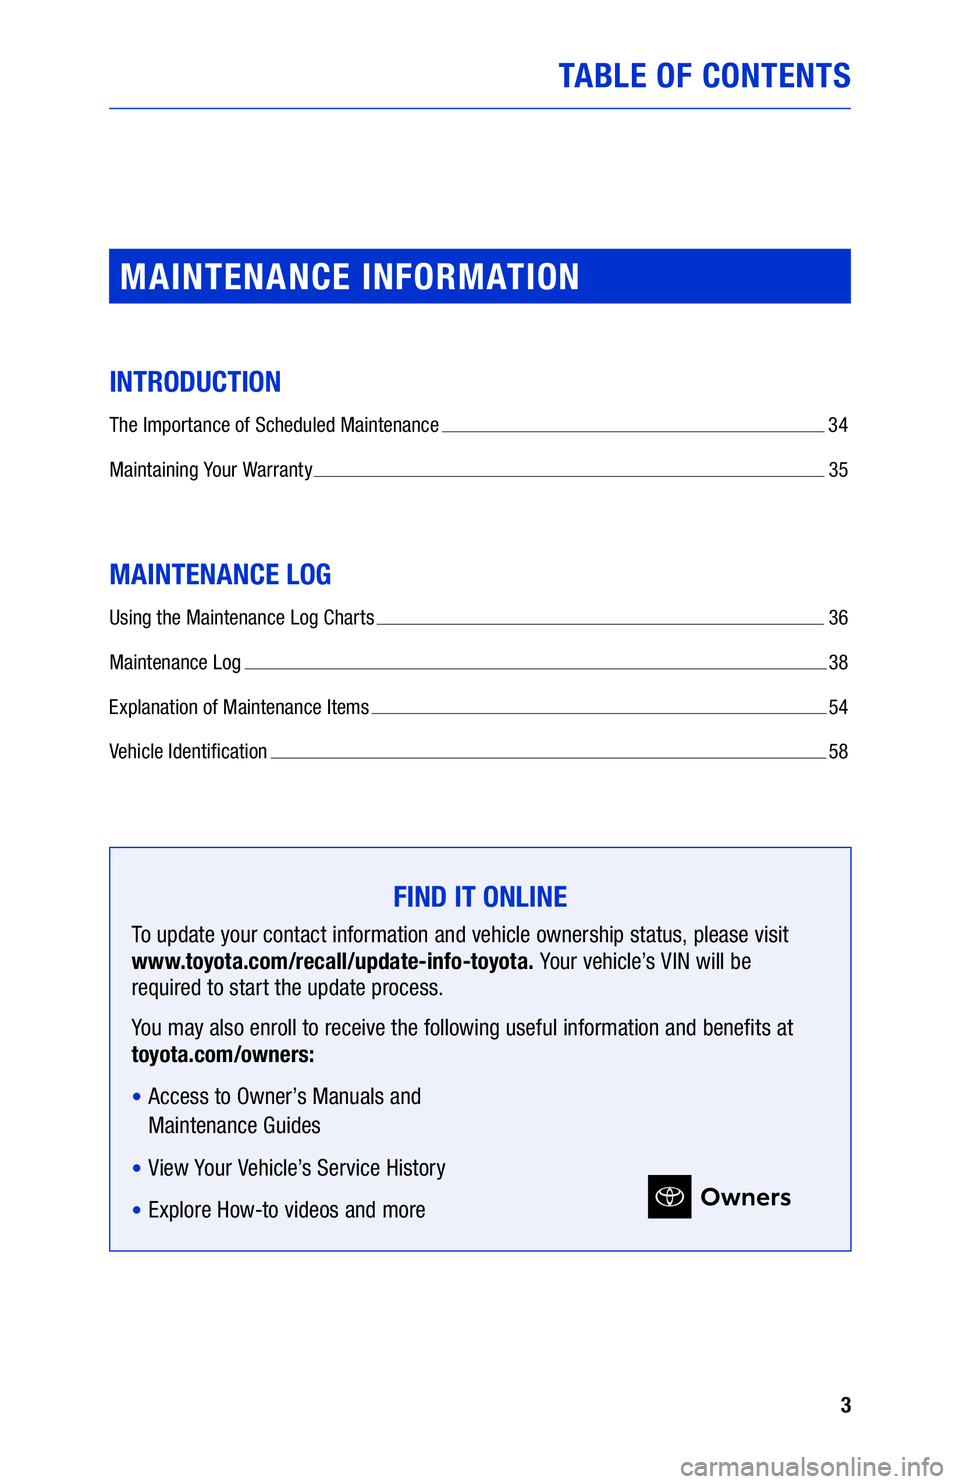 TOYOTA COROLLA HYBRID 2021  Warranties & Maintenance Guides (in English) 3
TABLE OF CONTENTS
MAINTENANCE INFORMATION
INTRODUCTION
The Importance of Scheduled Maintenance  34
Maintaining Your Warranty 
  35
MAINTENANCE LOG
Using the Maintenance Log Charts   36
Maintenance L